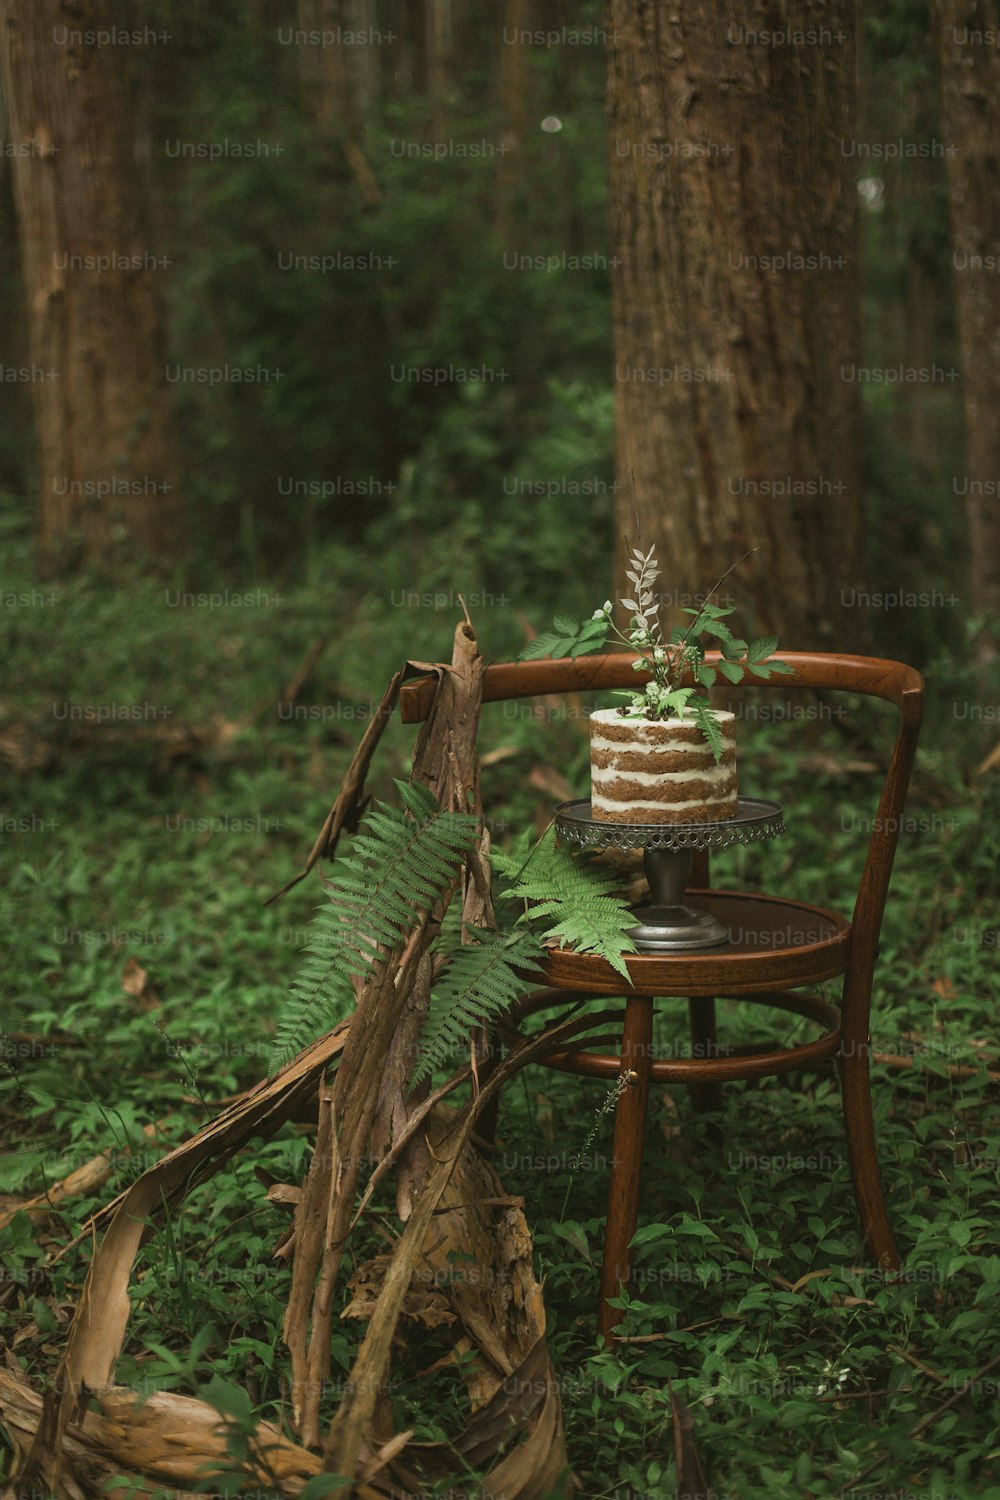 a cake sitting on a chair in the woods